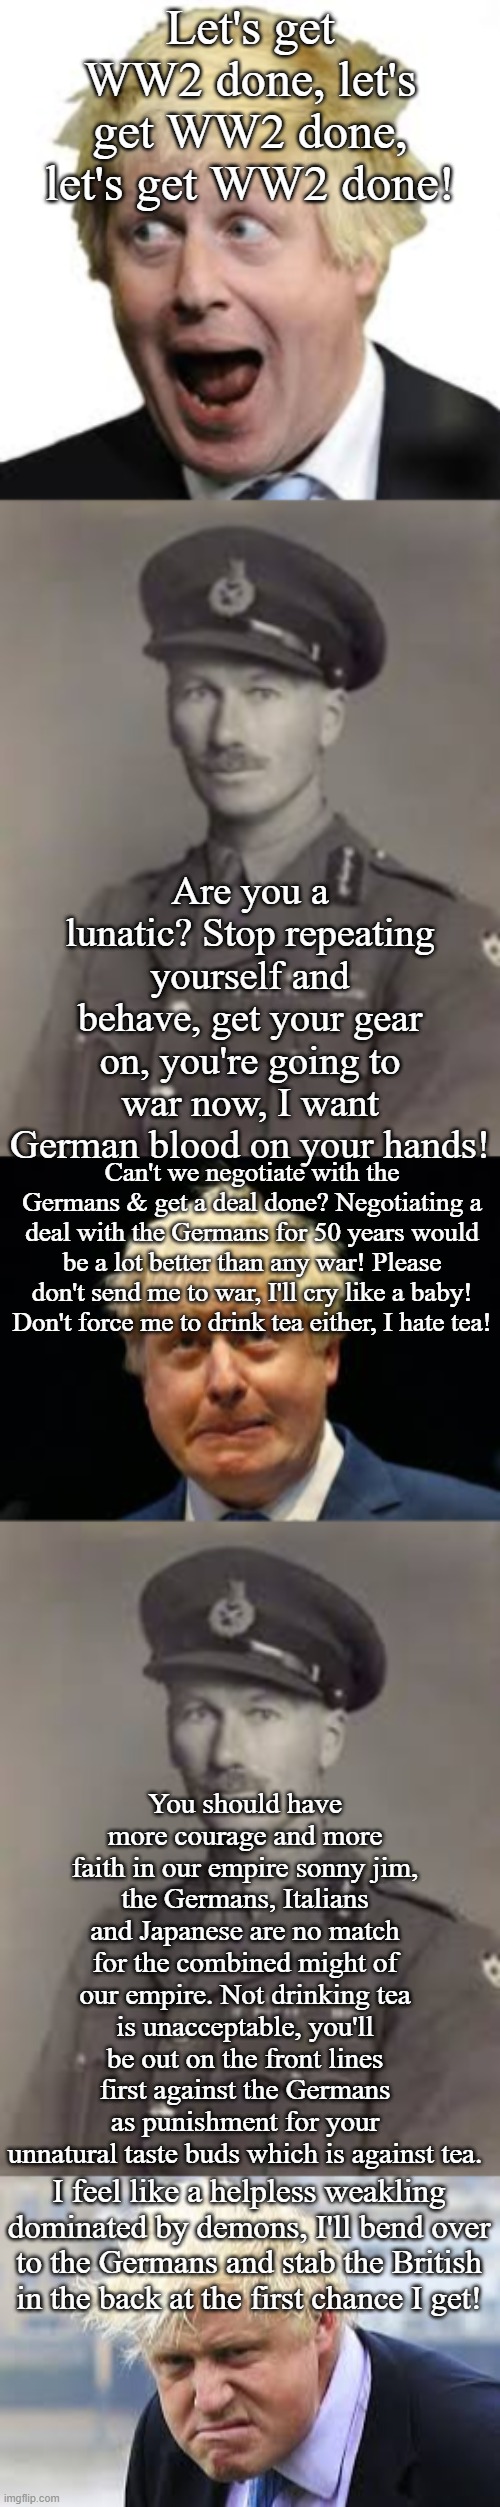 If Boris was in World War II | Let's get WW2 done, let's get WW2 done, let's get WW2 done! Are you a lunatic? Stop repeating yourself and behave, get your gear on, you're going to war now, I want German blood on your hands! Can't we negotiate with the Germans & get a deal done? Negotiating a deal with the Germans for 50 years would be a lot better than any war! Please don't send me to war, I'll cry like a baby! Don't force me to drink tea either, I hate tea! You should have more courage and more faith in our empire sonny jim, the Germans, Italians and Japanese are no match for the combined might of our empire. Not drinking tea is unacceptable, you'll be out on the front lines first against the Germans as punishment for your unnatural taste buds which is against tea. I feel like a helpless weakling dominated by demons, I'll bend over to the Germans and stab the British in the back at the first chance I get! | image tagged in world war 2,army,boris johnson,british,uk,britain | made w/ Imgflip meme maker